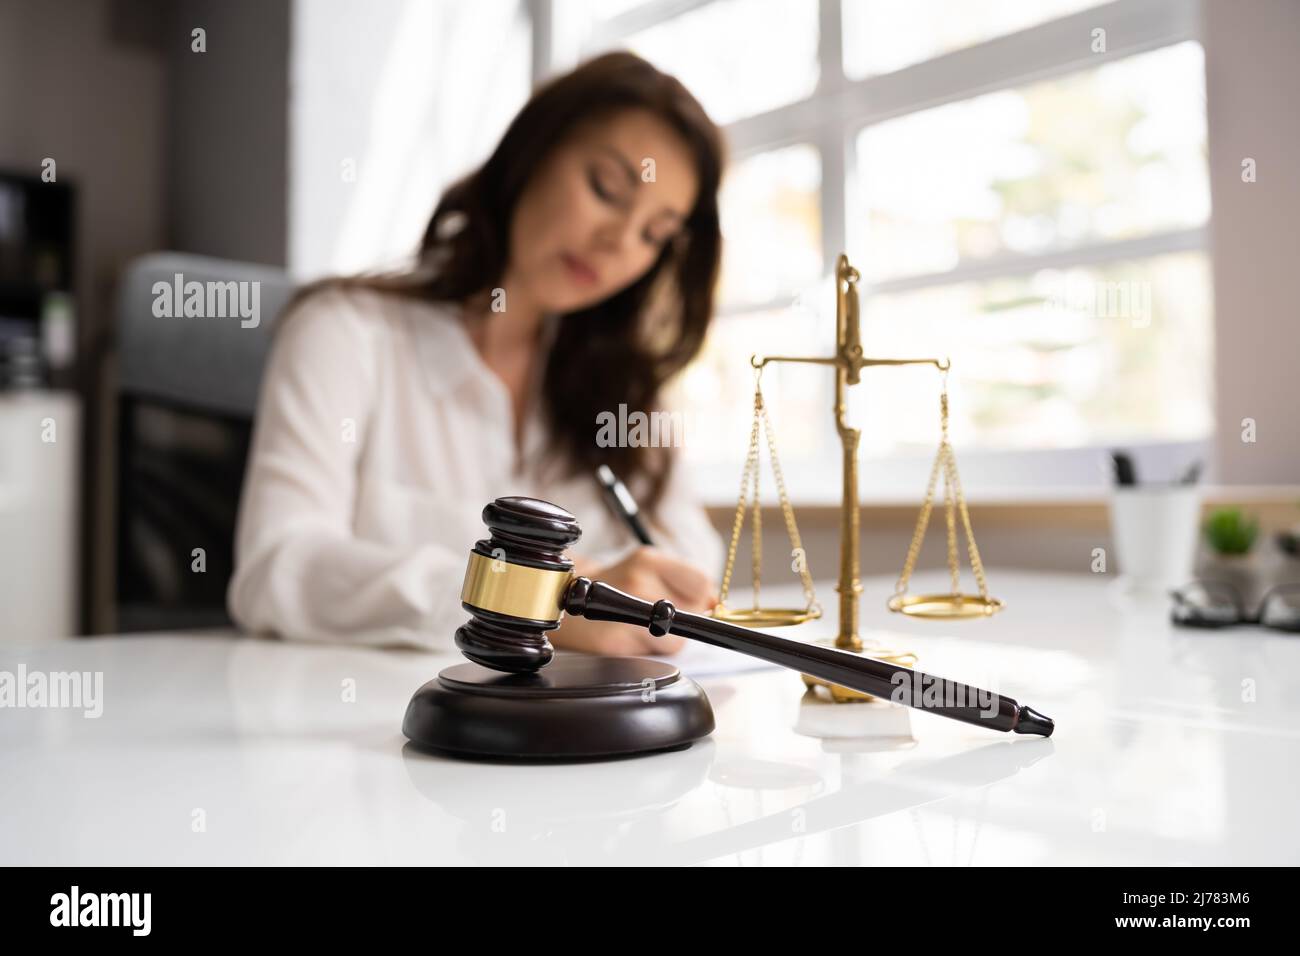 Female Lawyer In Courtroom At Litigation Trial Stock Photo